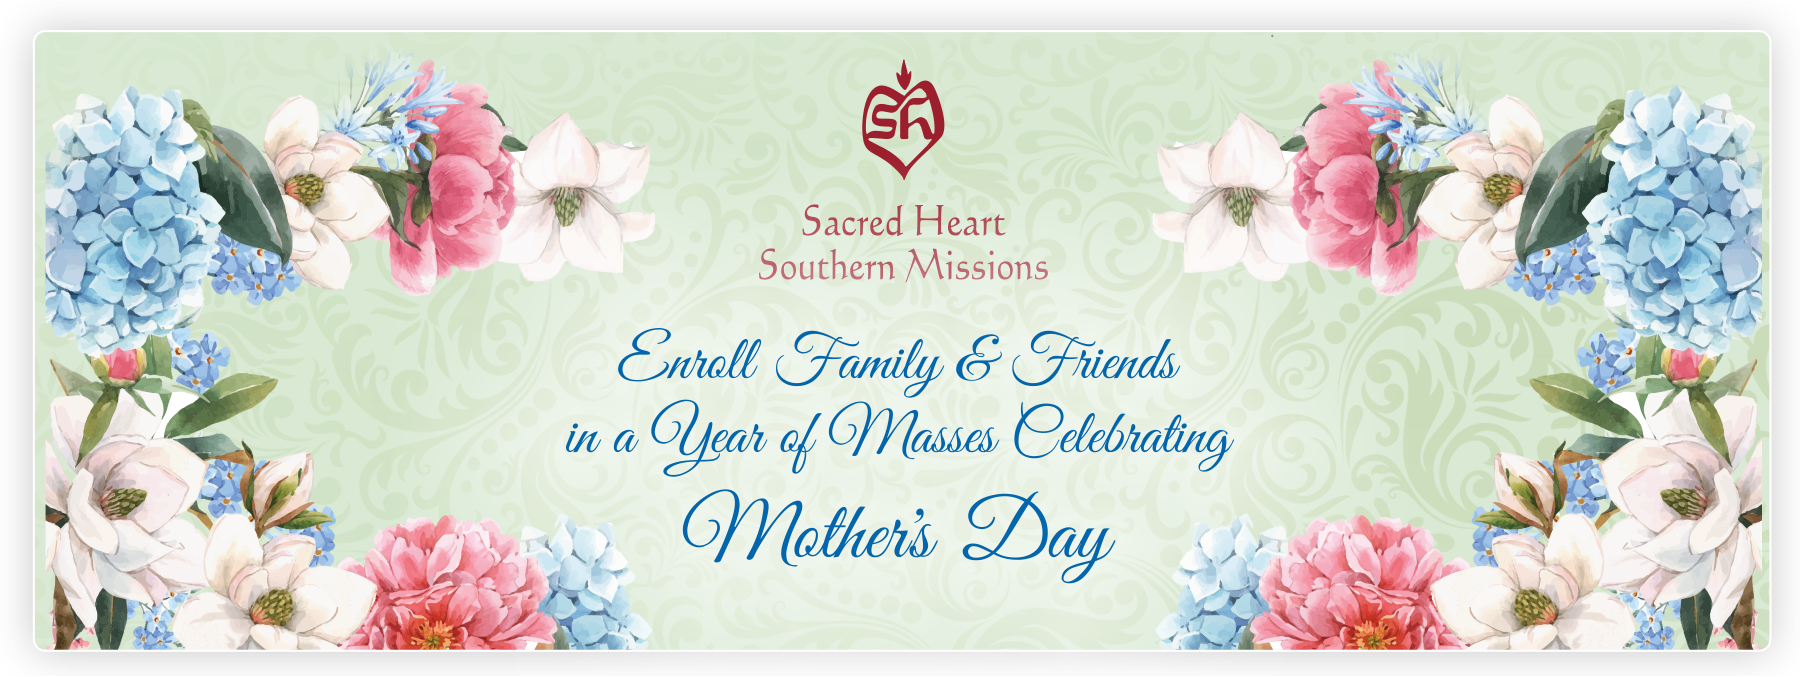 Mother's Year of Masses